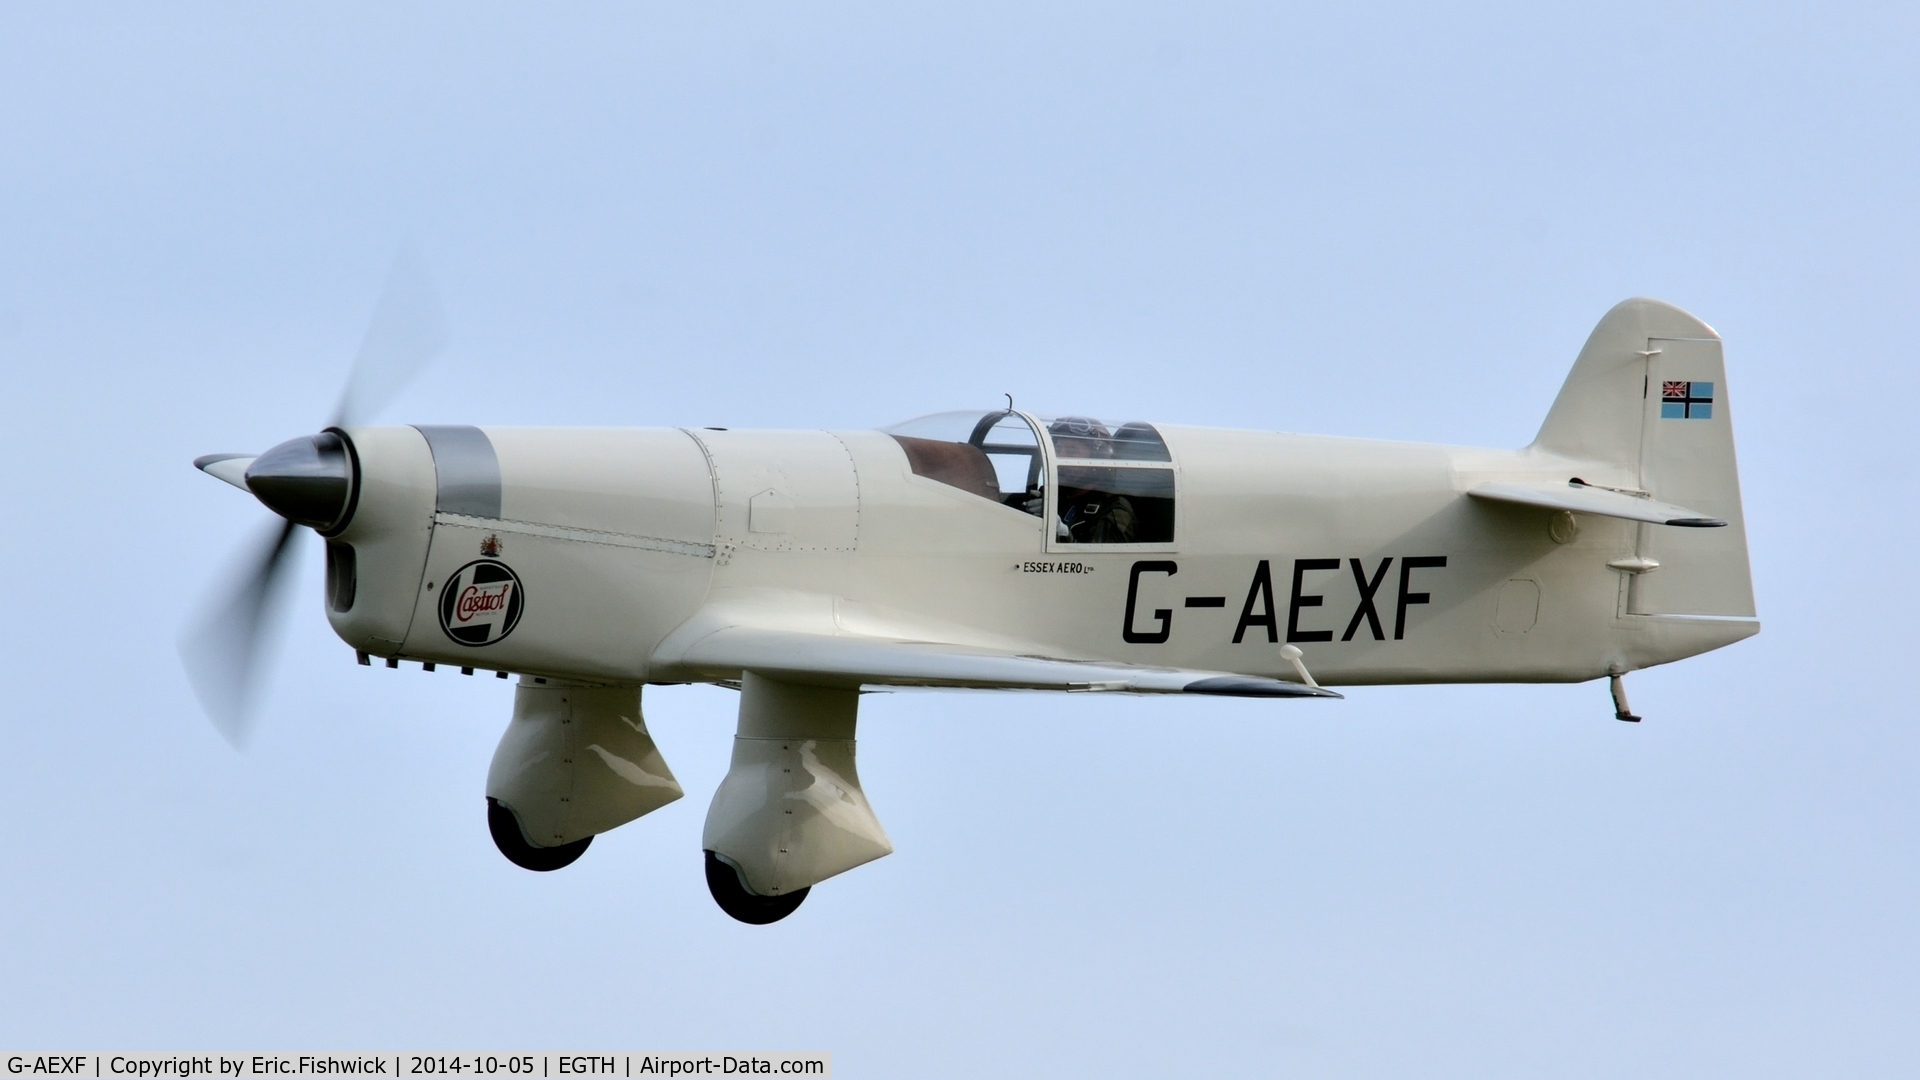 G-AEXF, 1936 Percival E-2H Mew Gull C/N E22, 41. G-AEXF in display mode at the rousing season finale Race Day Air Show at Shuttleworth, Oct. 2014.